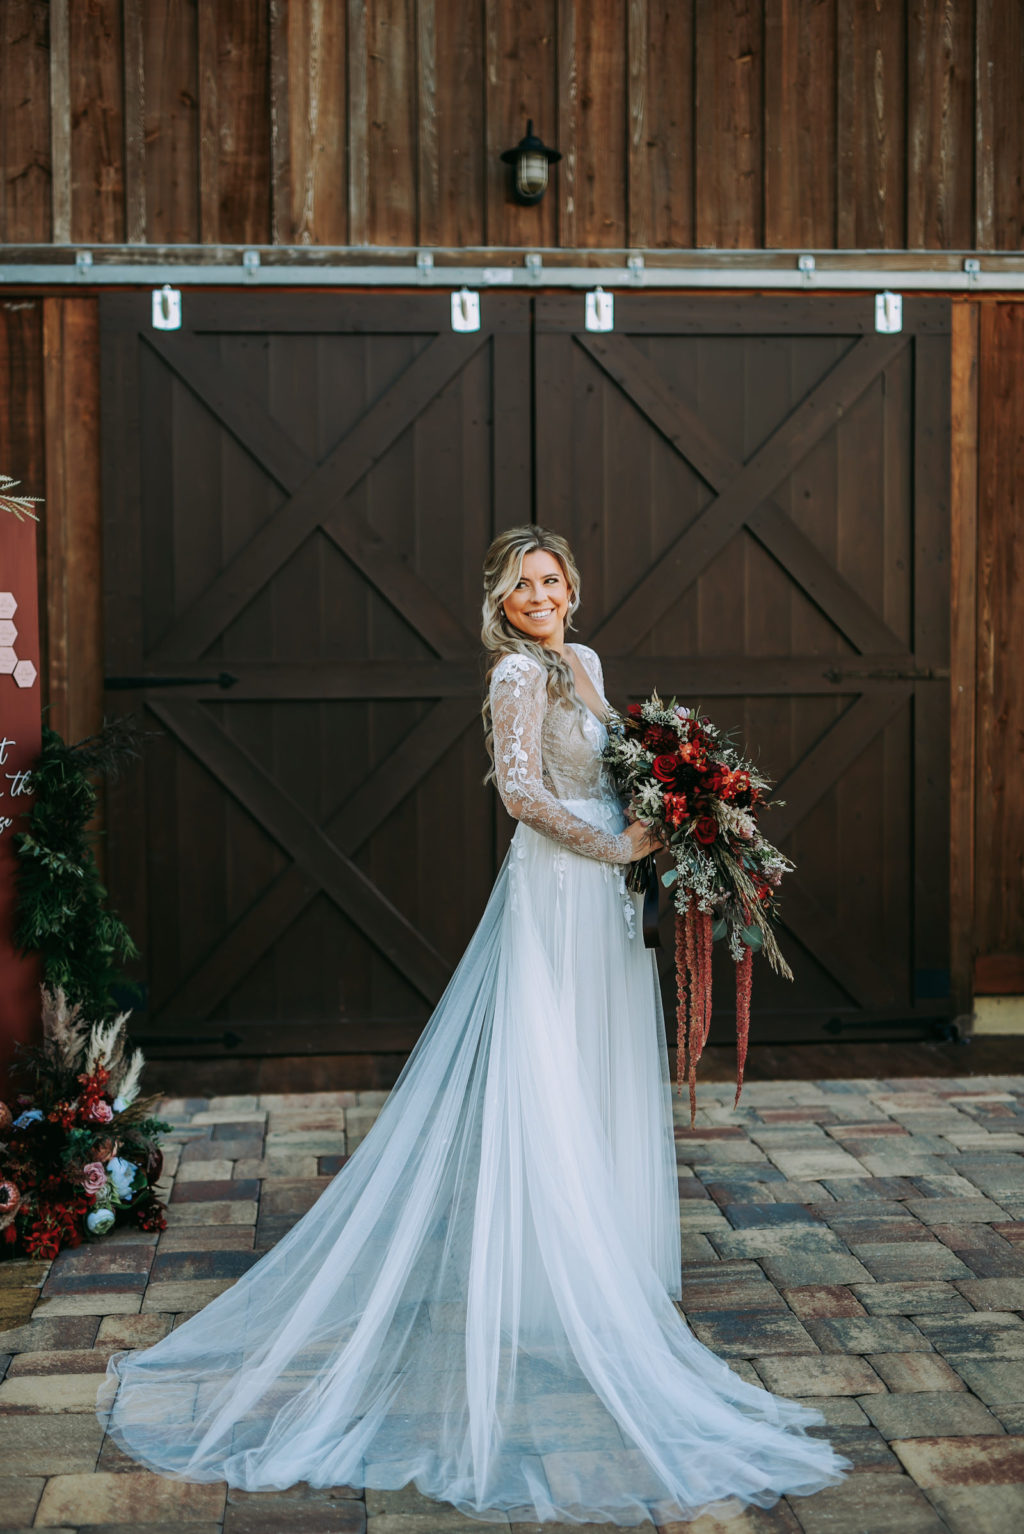 Rustic Bride Wearing Lace and Illusion Long Sleeve Wedding Dress Holding Burgundy Red Flowers, Greenery and Hanging Amaranthus Bouquet | Tampa Wedding Venue Mision Lago Estate